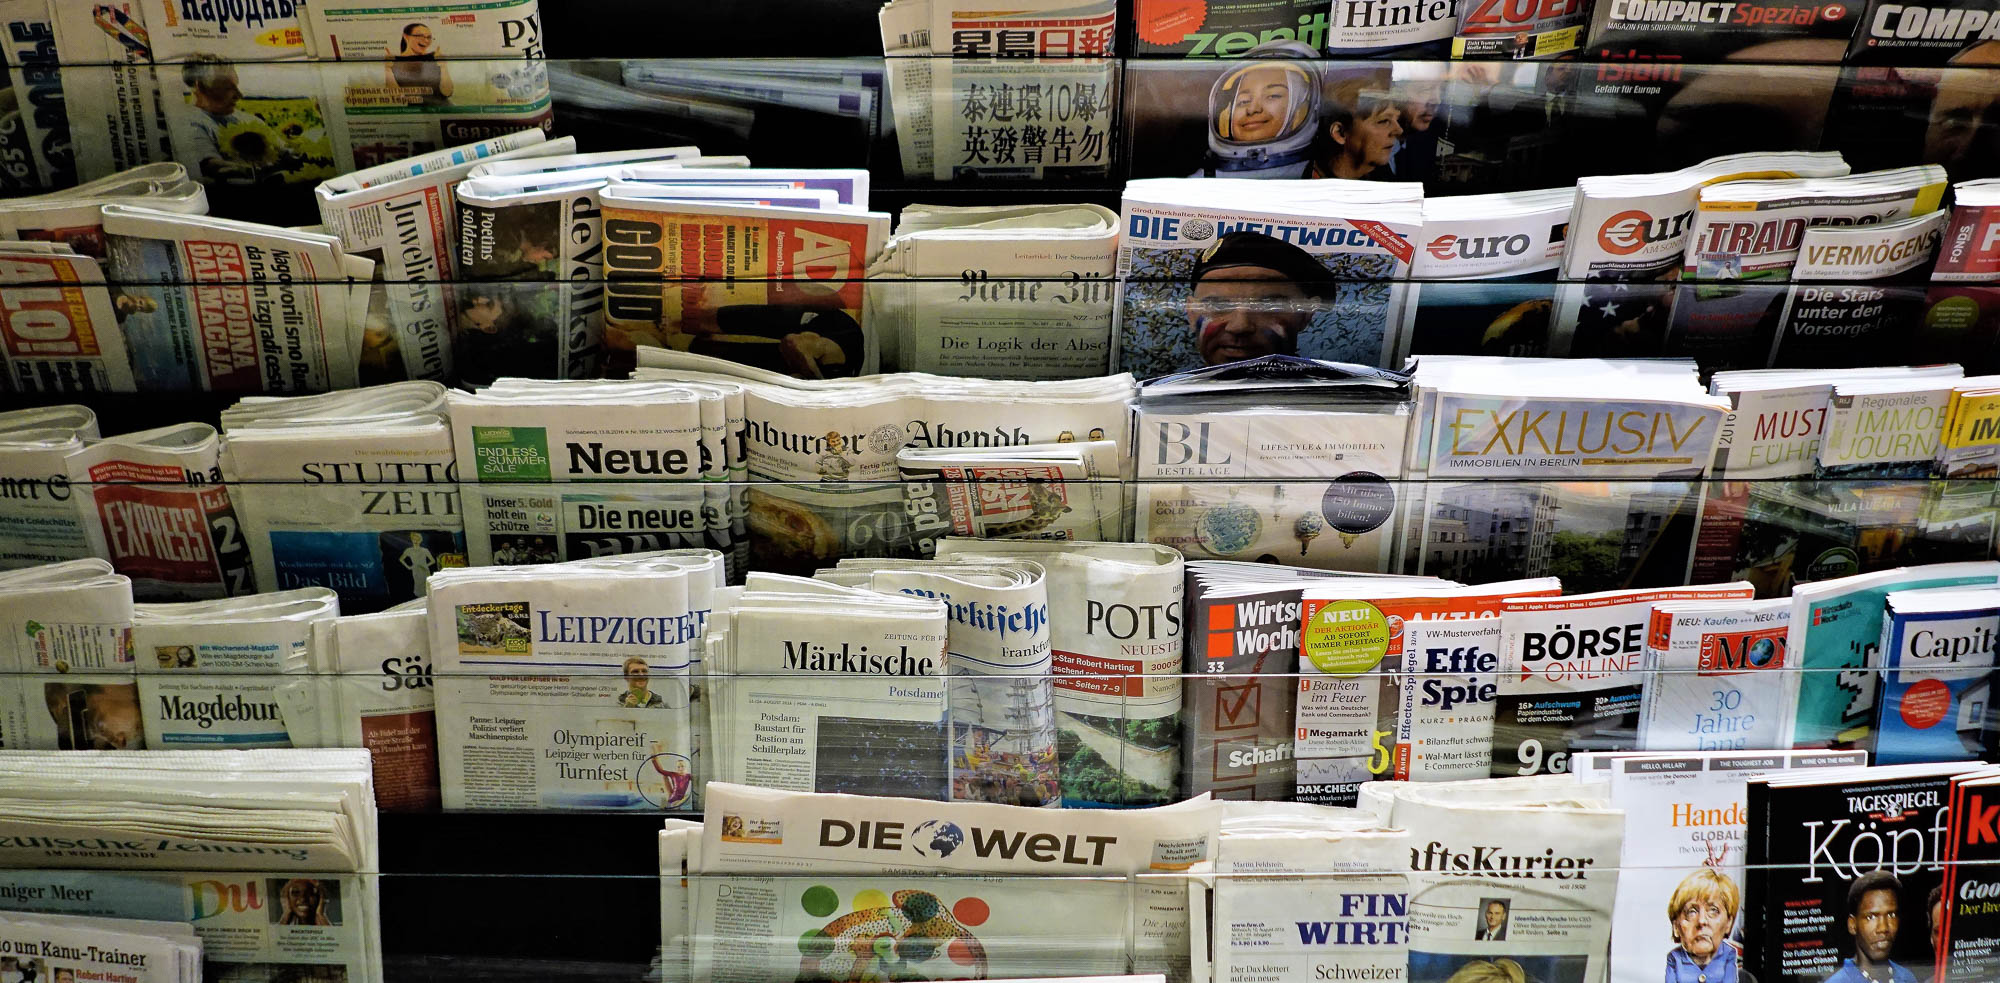 Berlin, Germany - August 2016: Colorful and interesting collection of european newspapers, periodicals, magazines in newsstand rack. Editorial credit: P Gregory / Shutterstock.com.